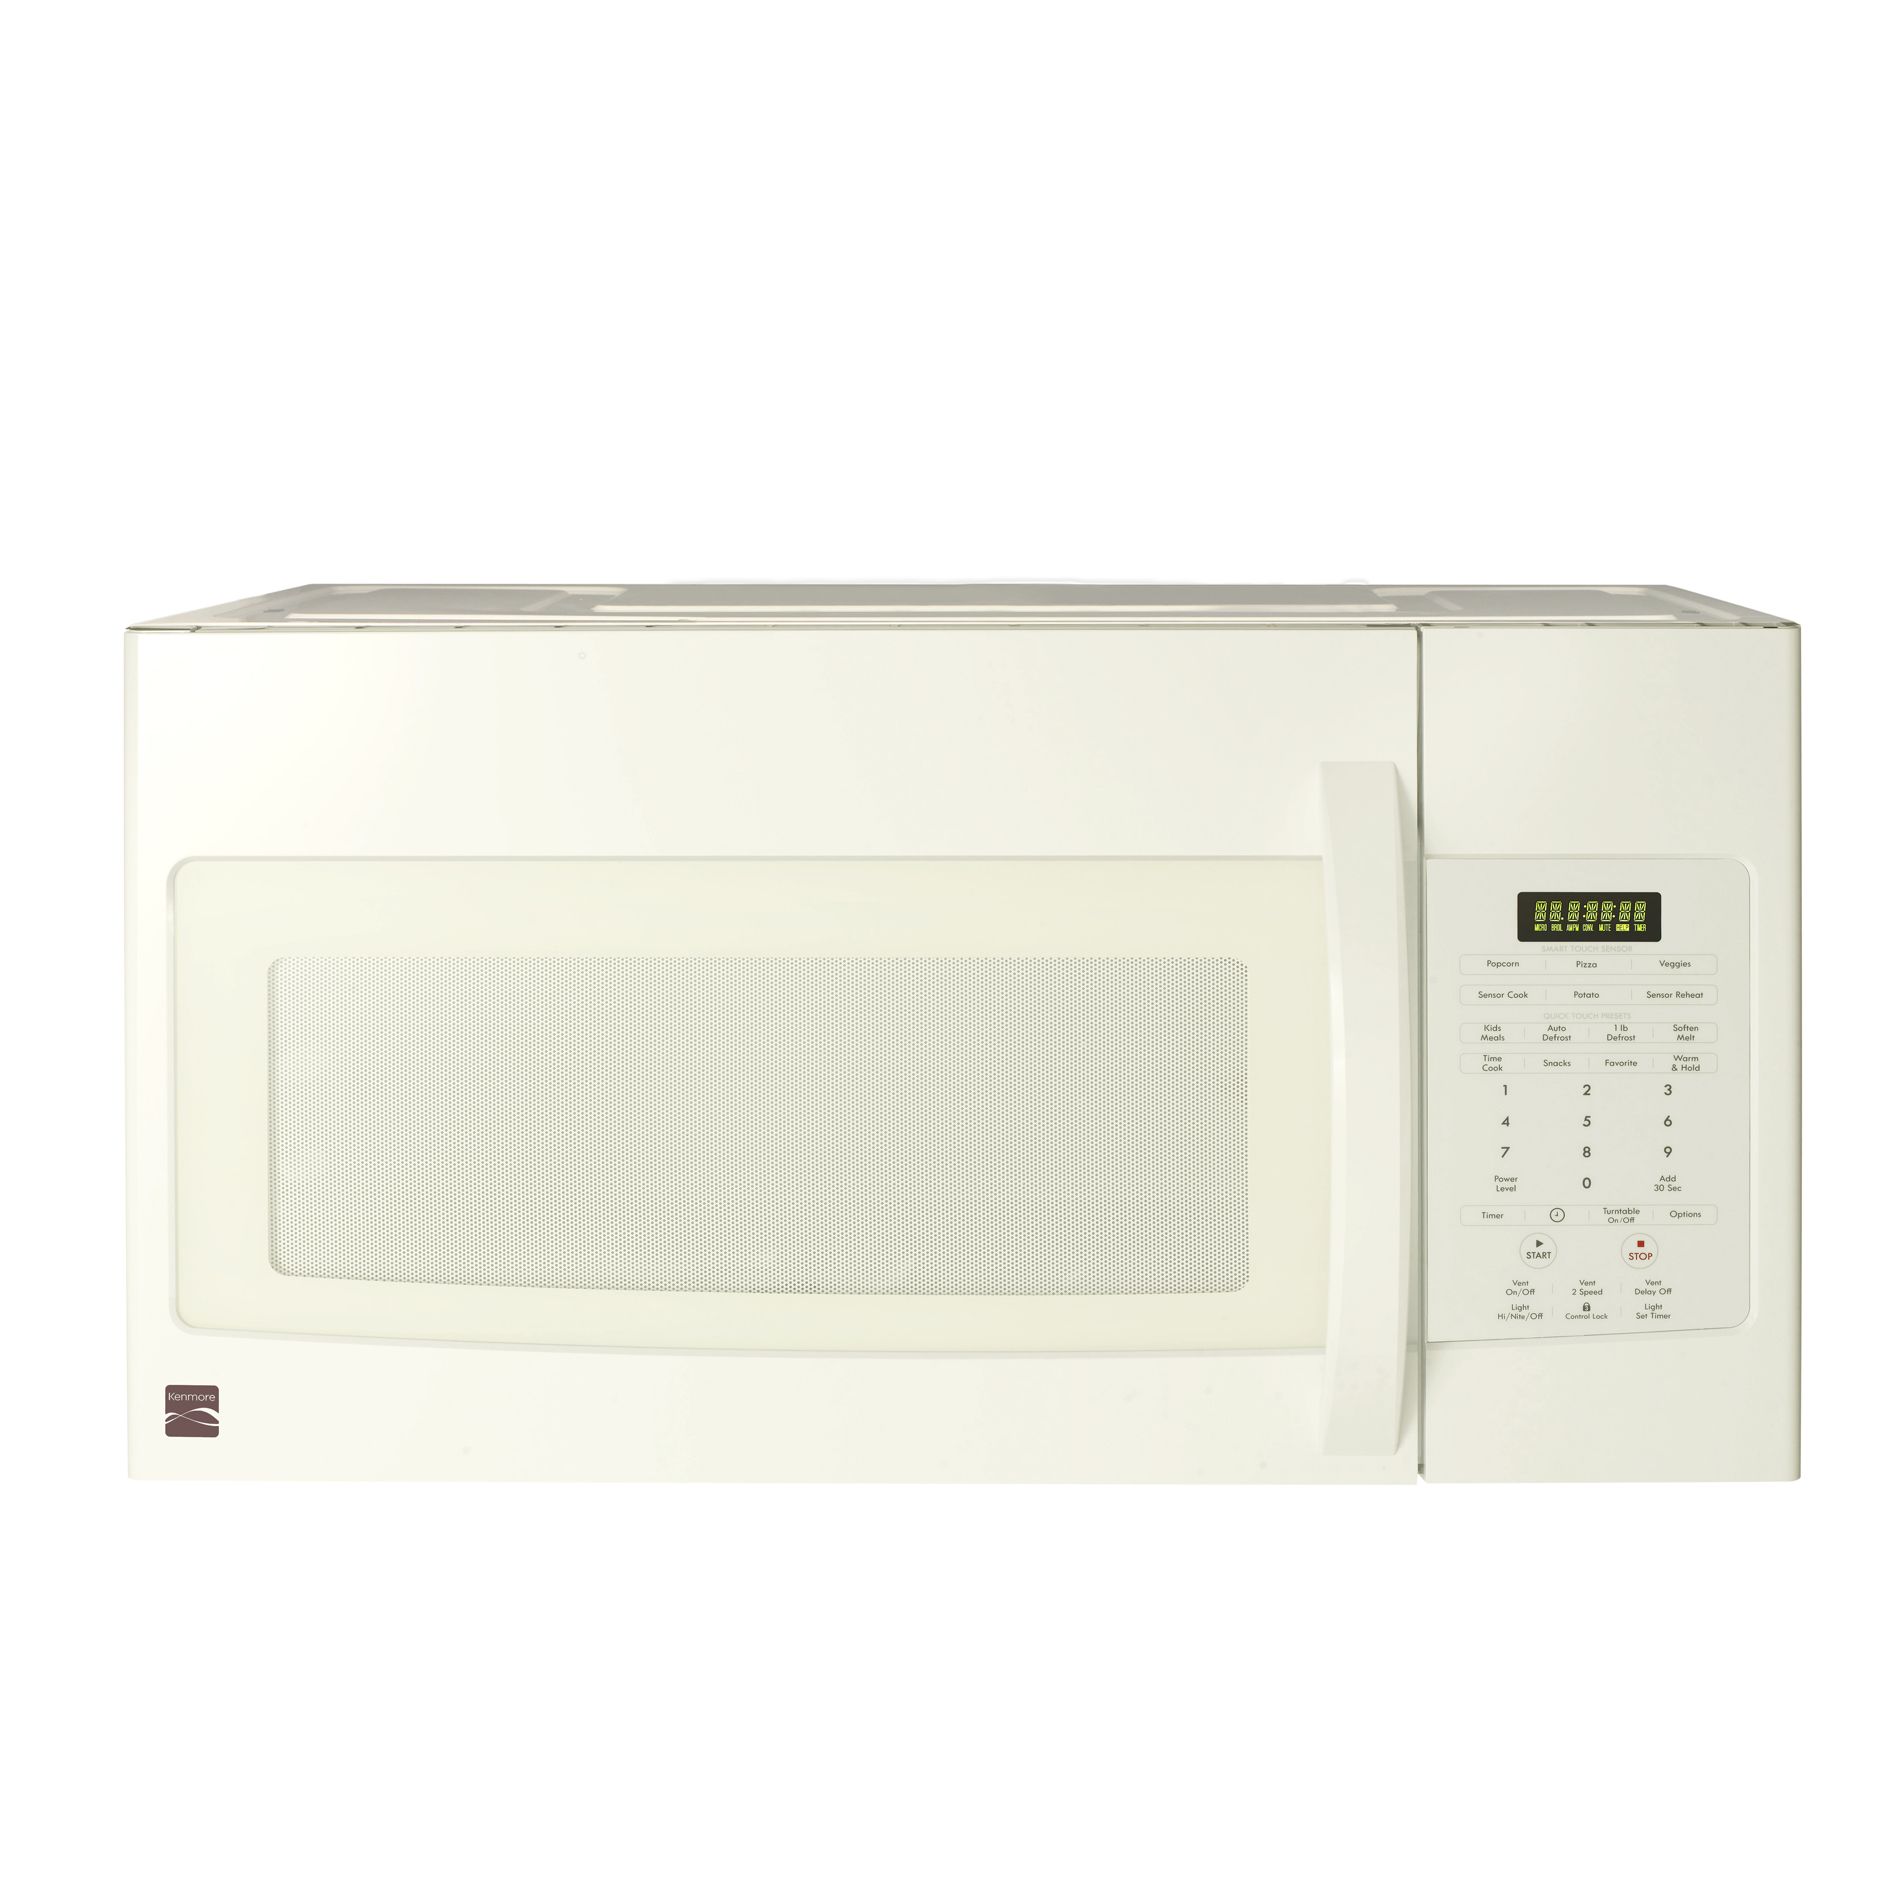 Kenmore Over the Range Microwave 1.7 cu. ft. 85044 - Sears